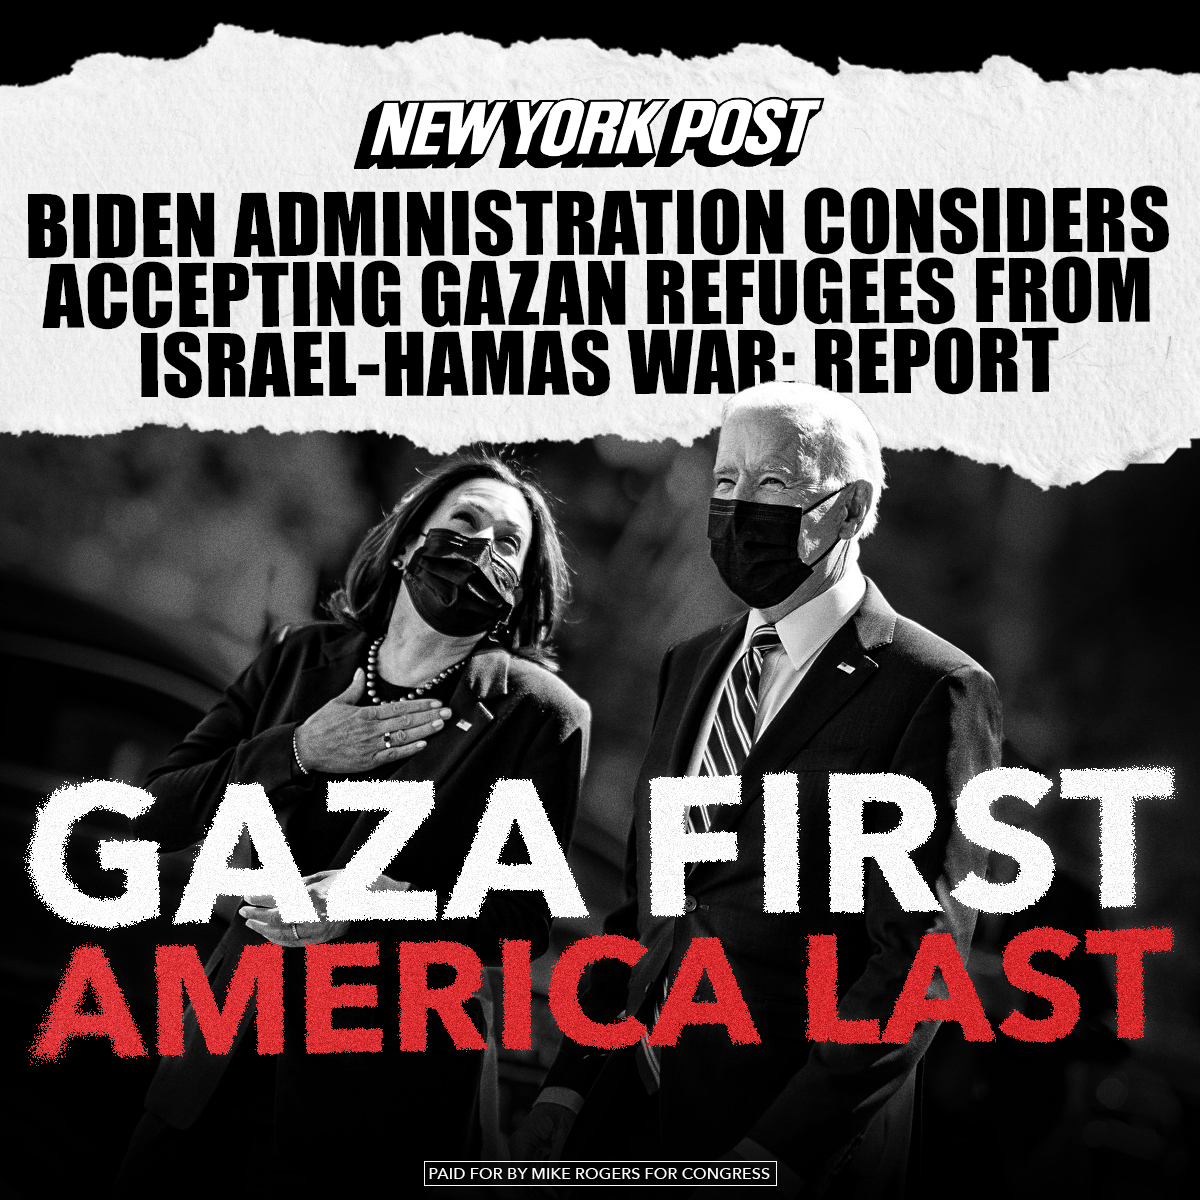 Americans are STILL being held hostage by Hamas, but instead of doing EVERYTHING to bring them home, Joe Biden wants to welcome Gazan “refugees” into OUR country with open arms. Make no mistake, the radical left hates our country and our values.